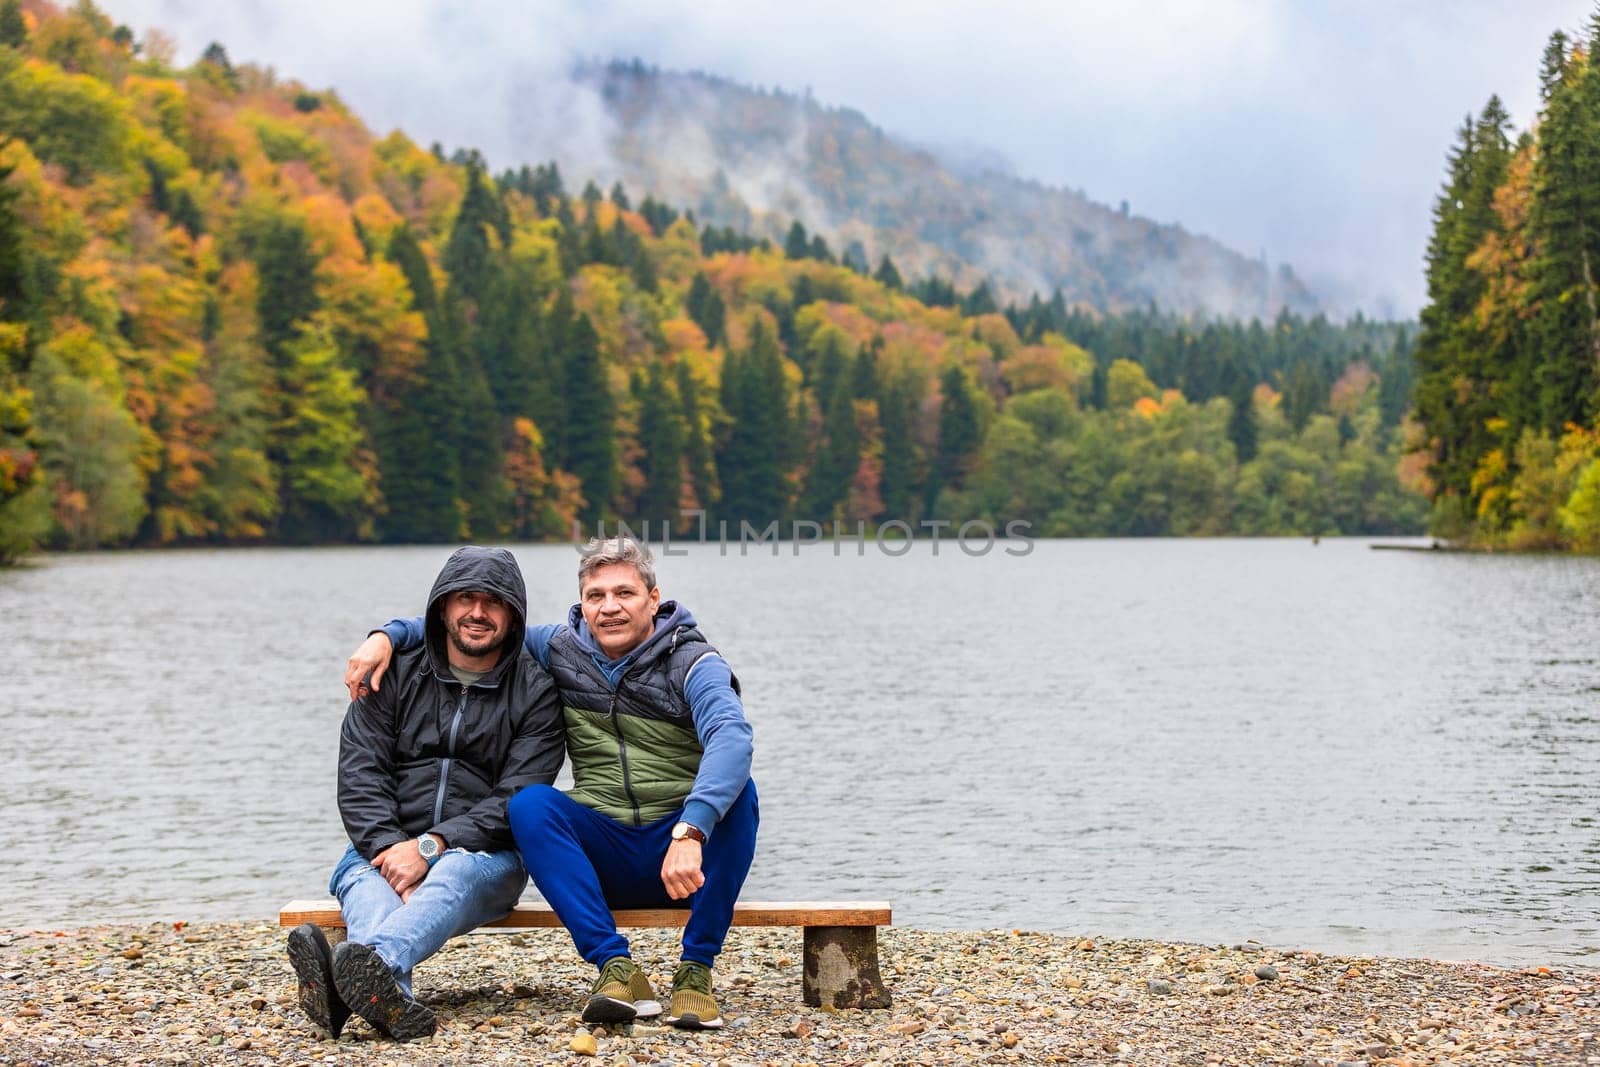 Two men enjoying the silence and the view of the autumn lake in the mountains.